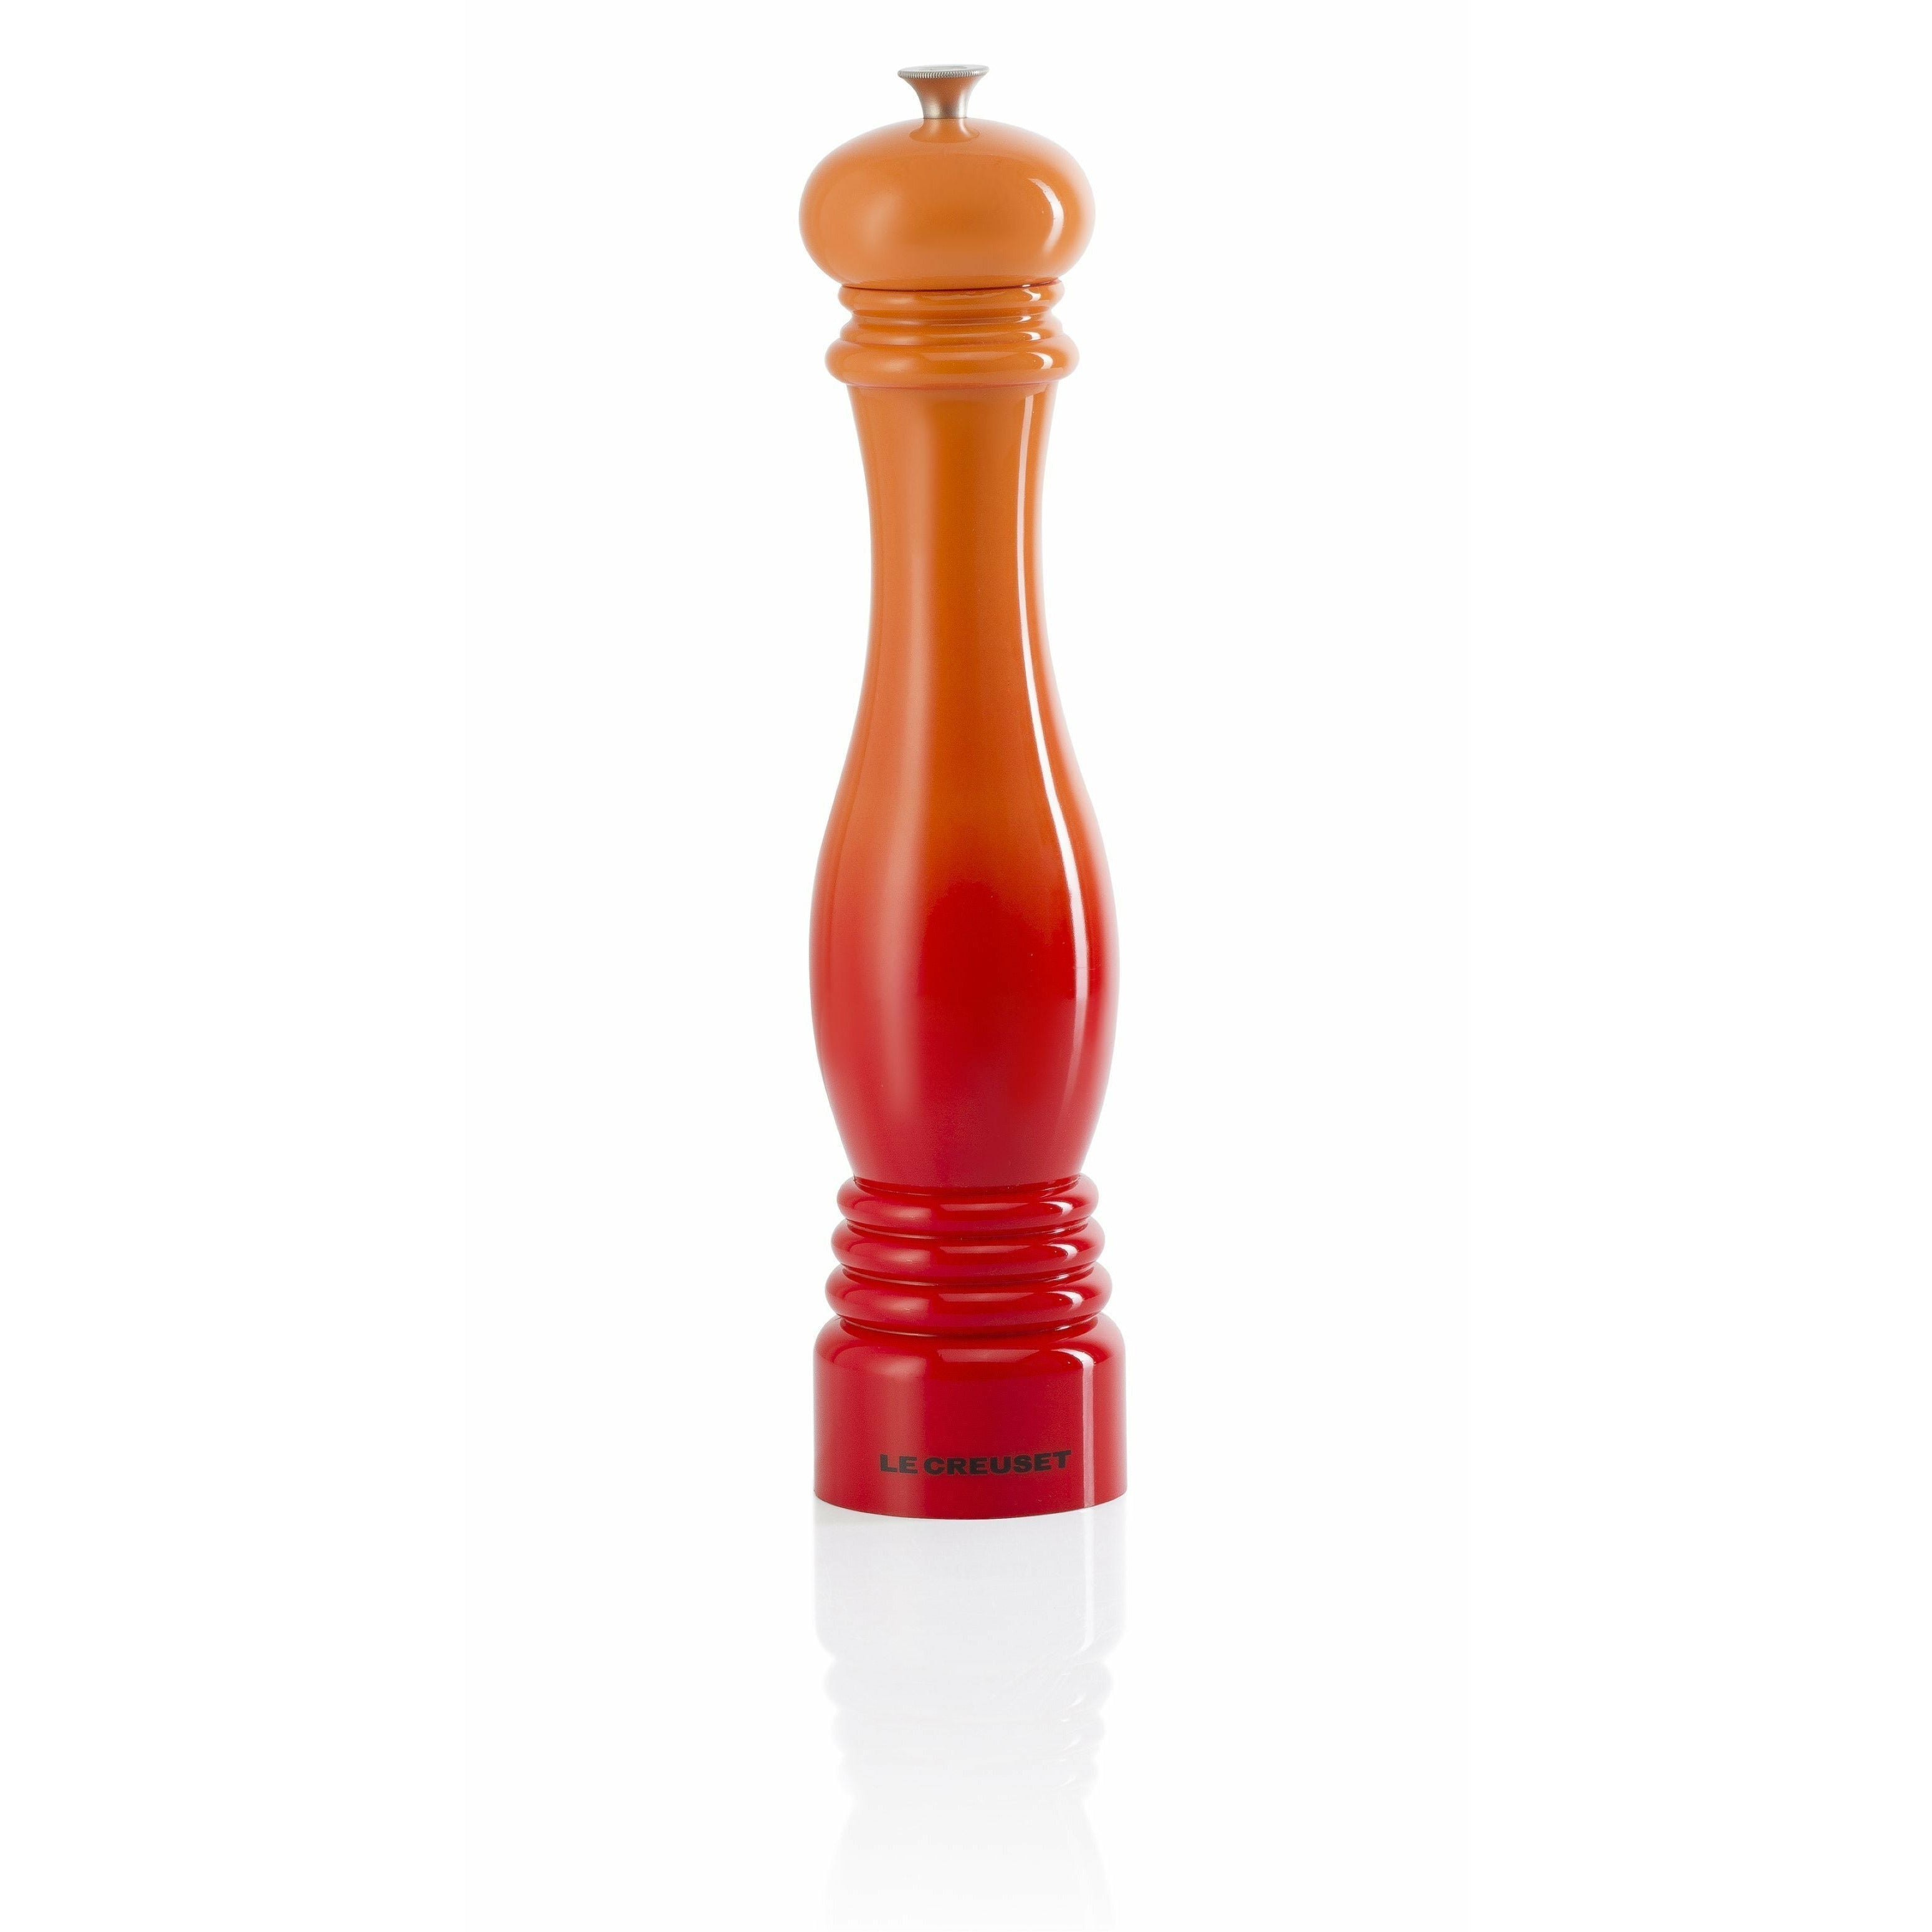 Le Creuset Pepper Mill 30 Cm, Oven Red